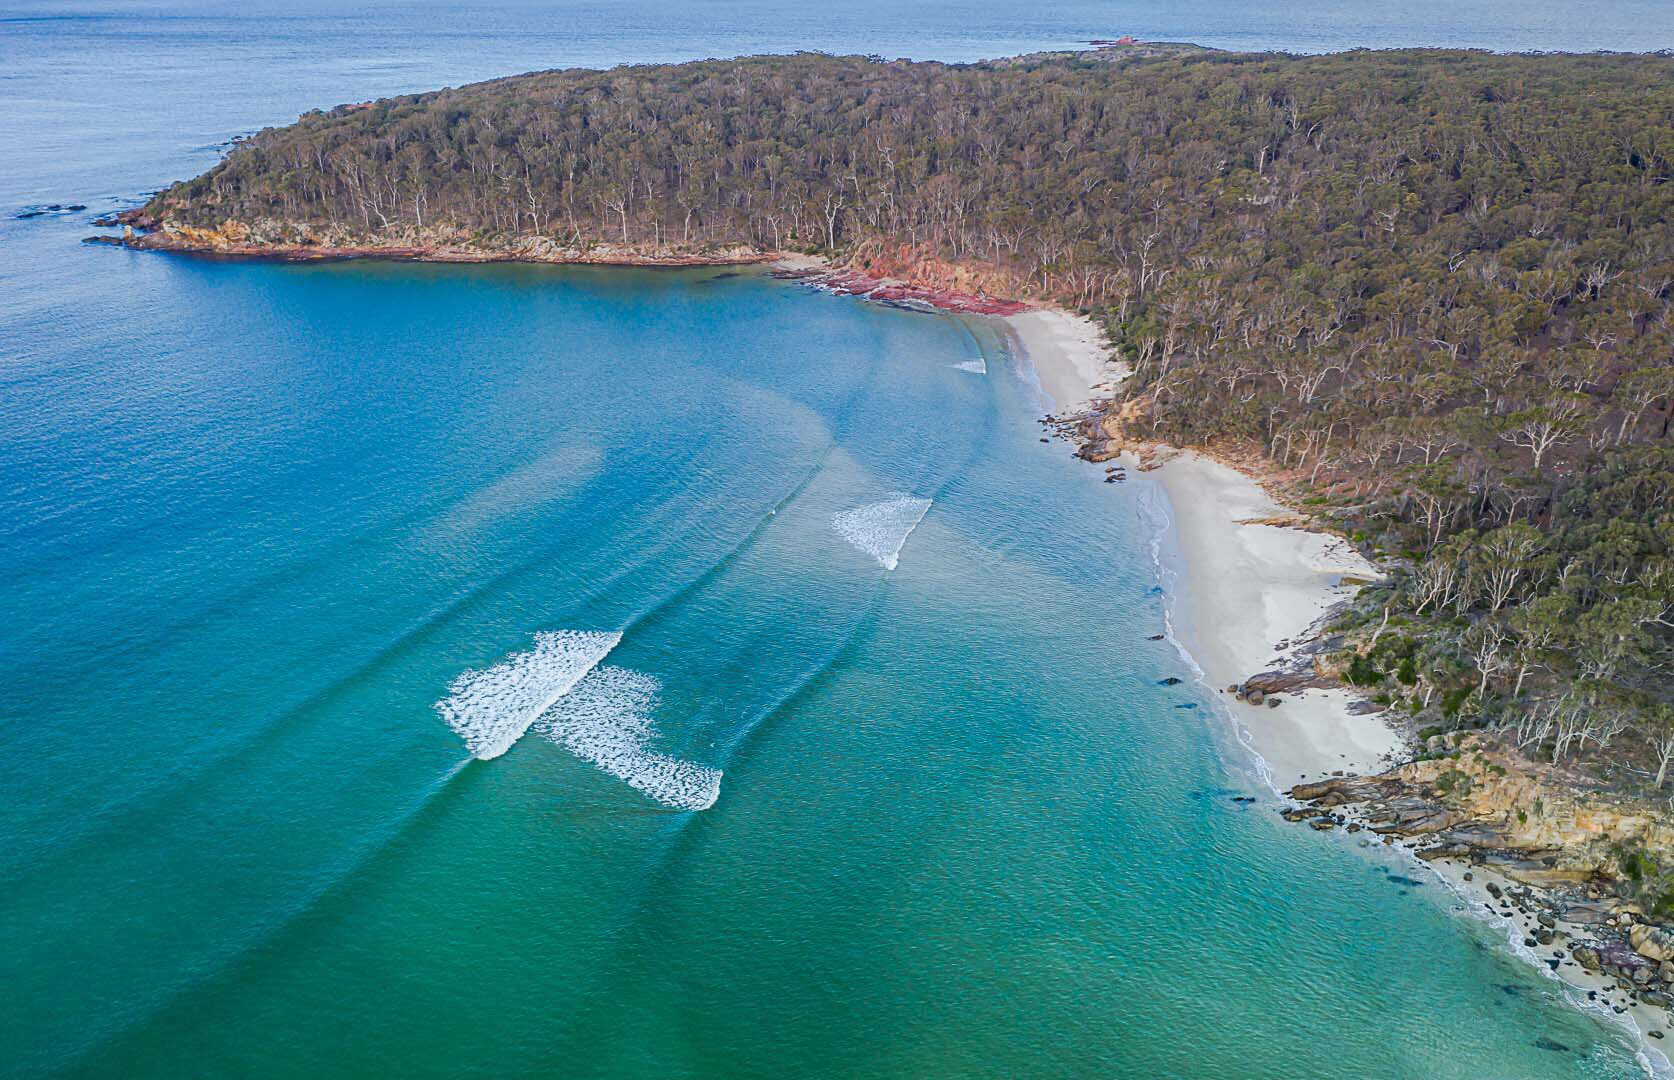 20200820-Arial view of Ben Boyd National Park Barmouth Beach.jpg 20210502-DJI_0398.jpg From the pristine sandy shores of Aslings Beach and the rugged clifftops of the peninsula to exhilarating bushwalks through spectacular wilderness including the beach front scenic walking tracks & superb whale watching lookouts, Eden is a geographically spectacular destination. Just a 20-minute drive from Merimbula Airport, it’s easily accessible, with Canberra within a three-hour drive as well as being situated exactly halfway between Melbourne and Sydney. For skiing devotees, the NSW snowfields are less than three hours from your door.